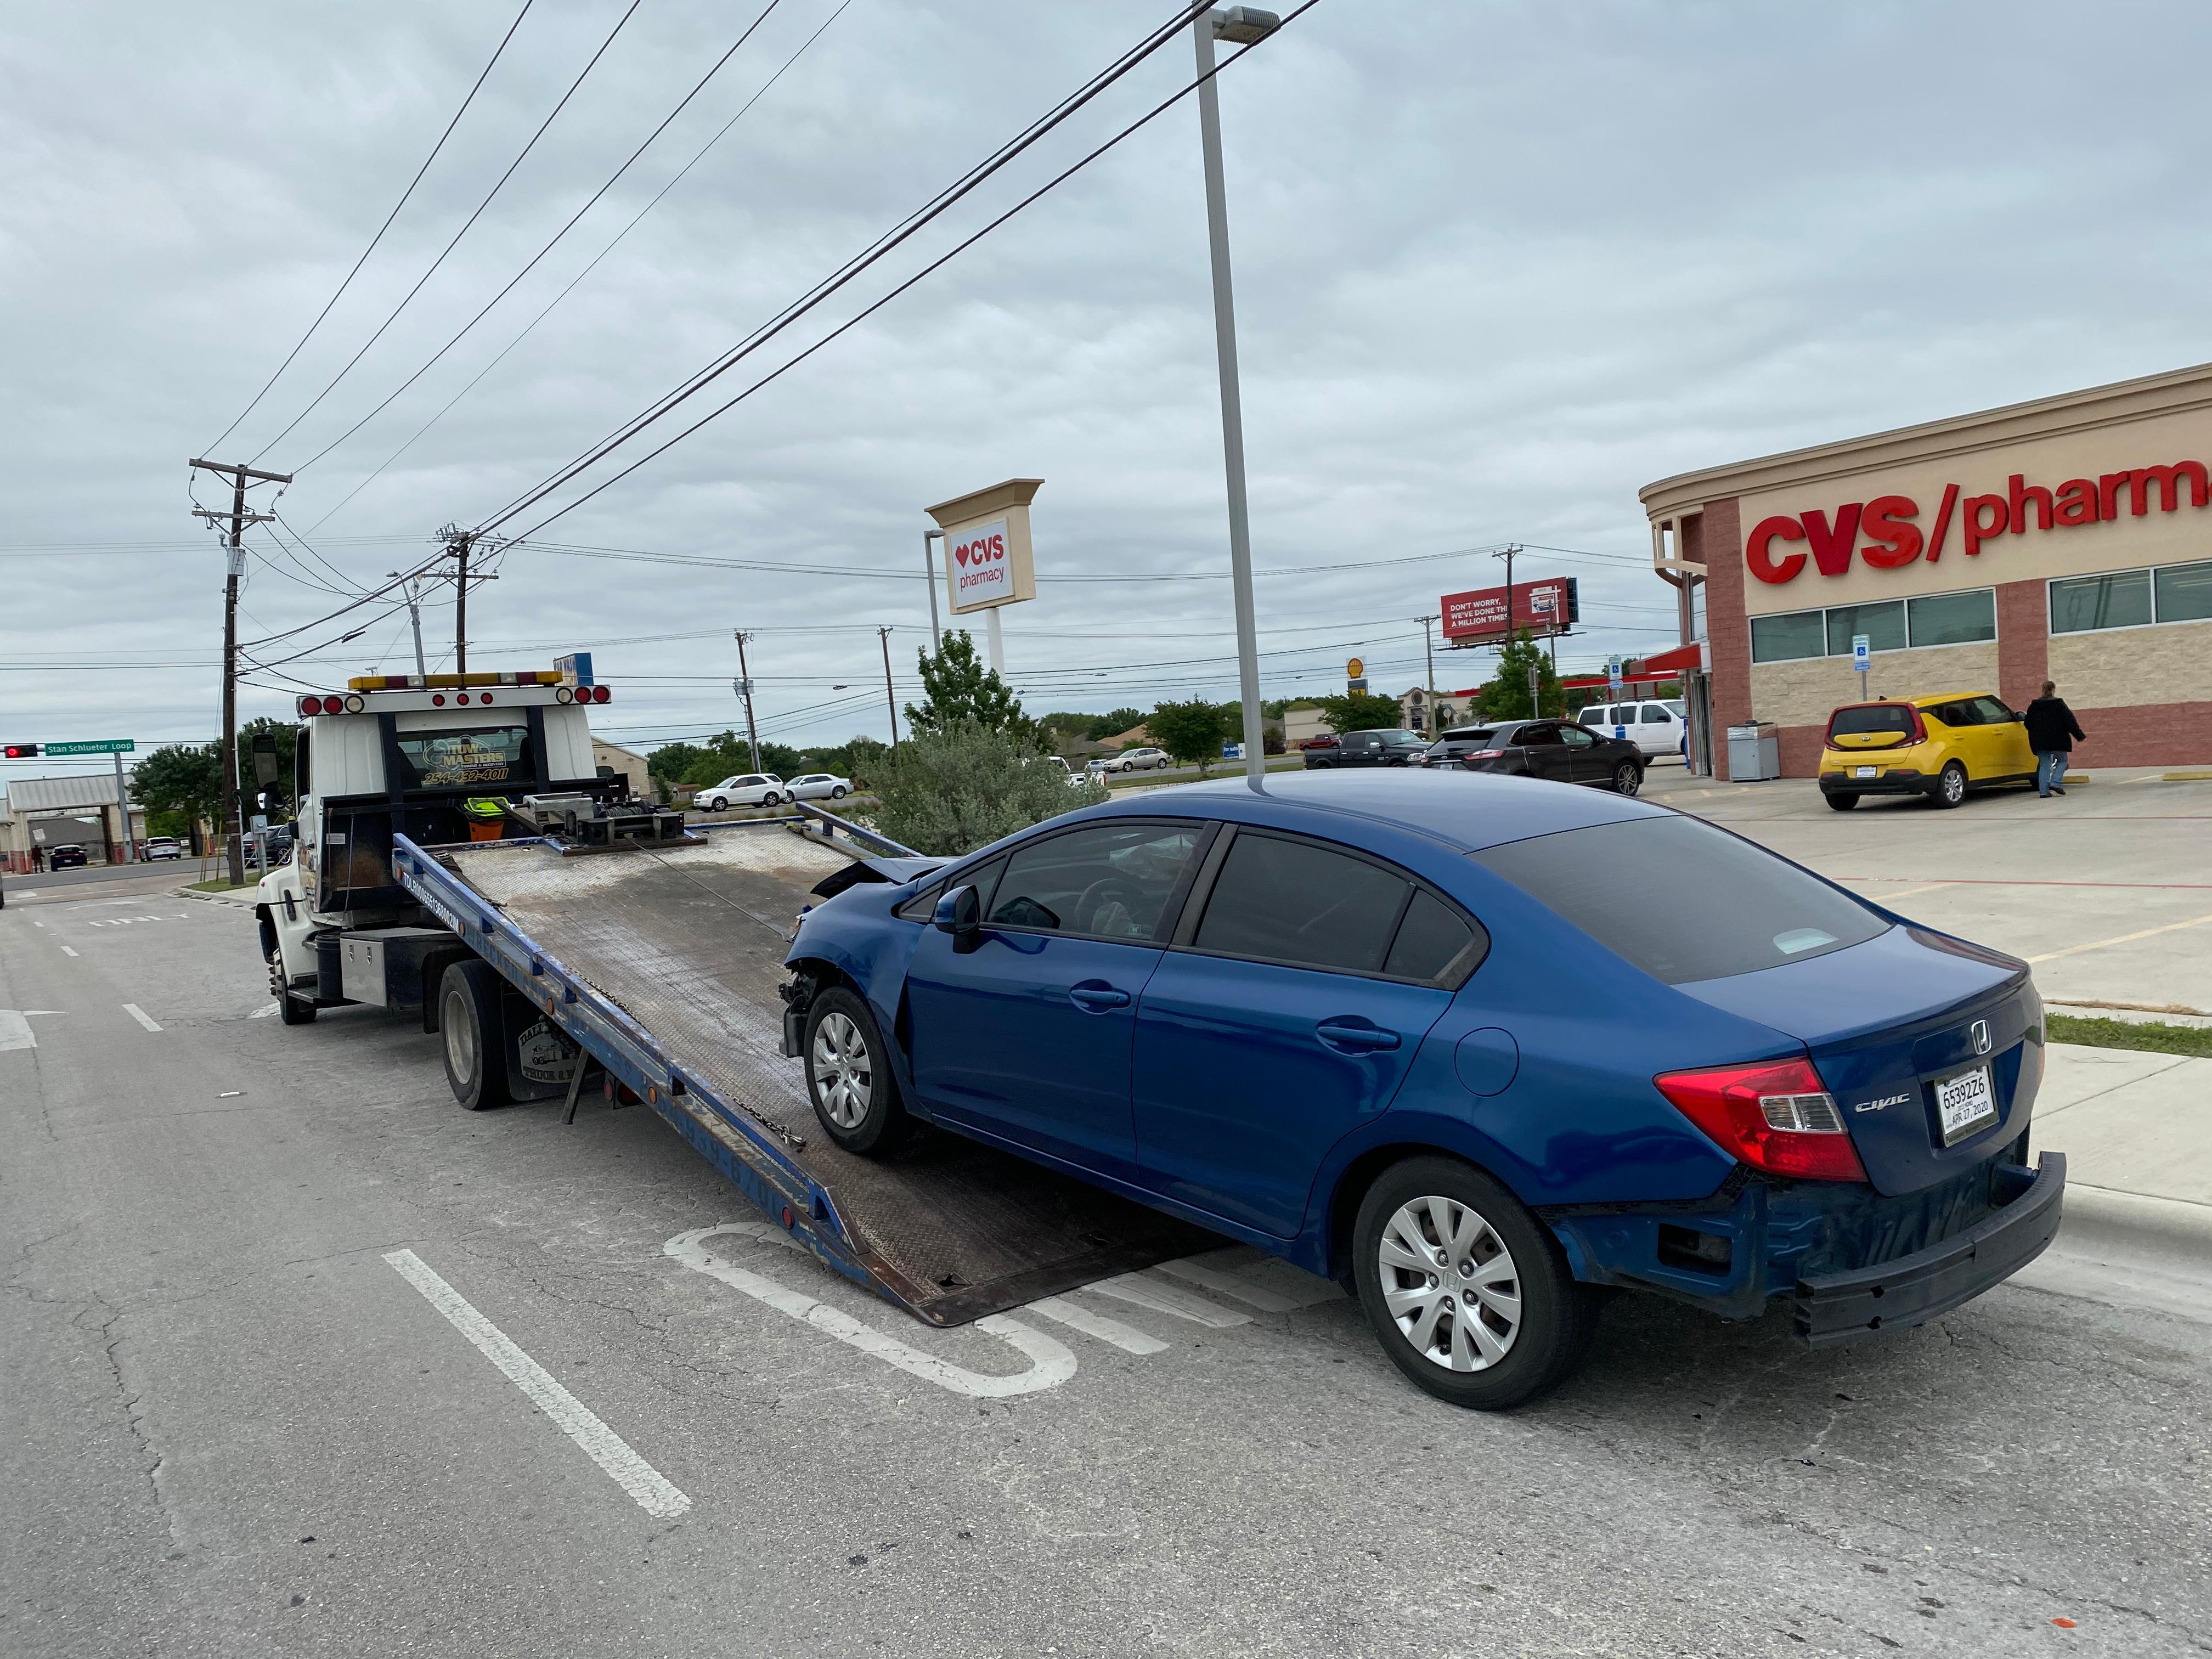 Contact us for Towing Services! Tow Masters Towing & Recovery Killeen (254)432-4011